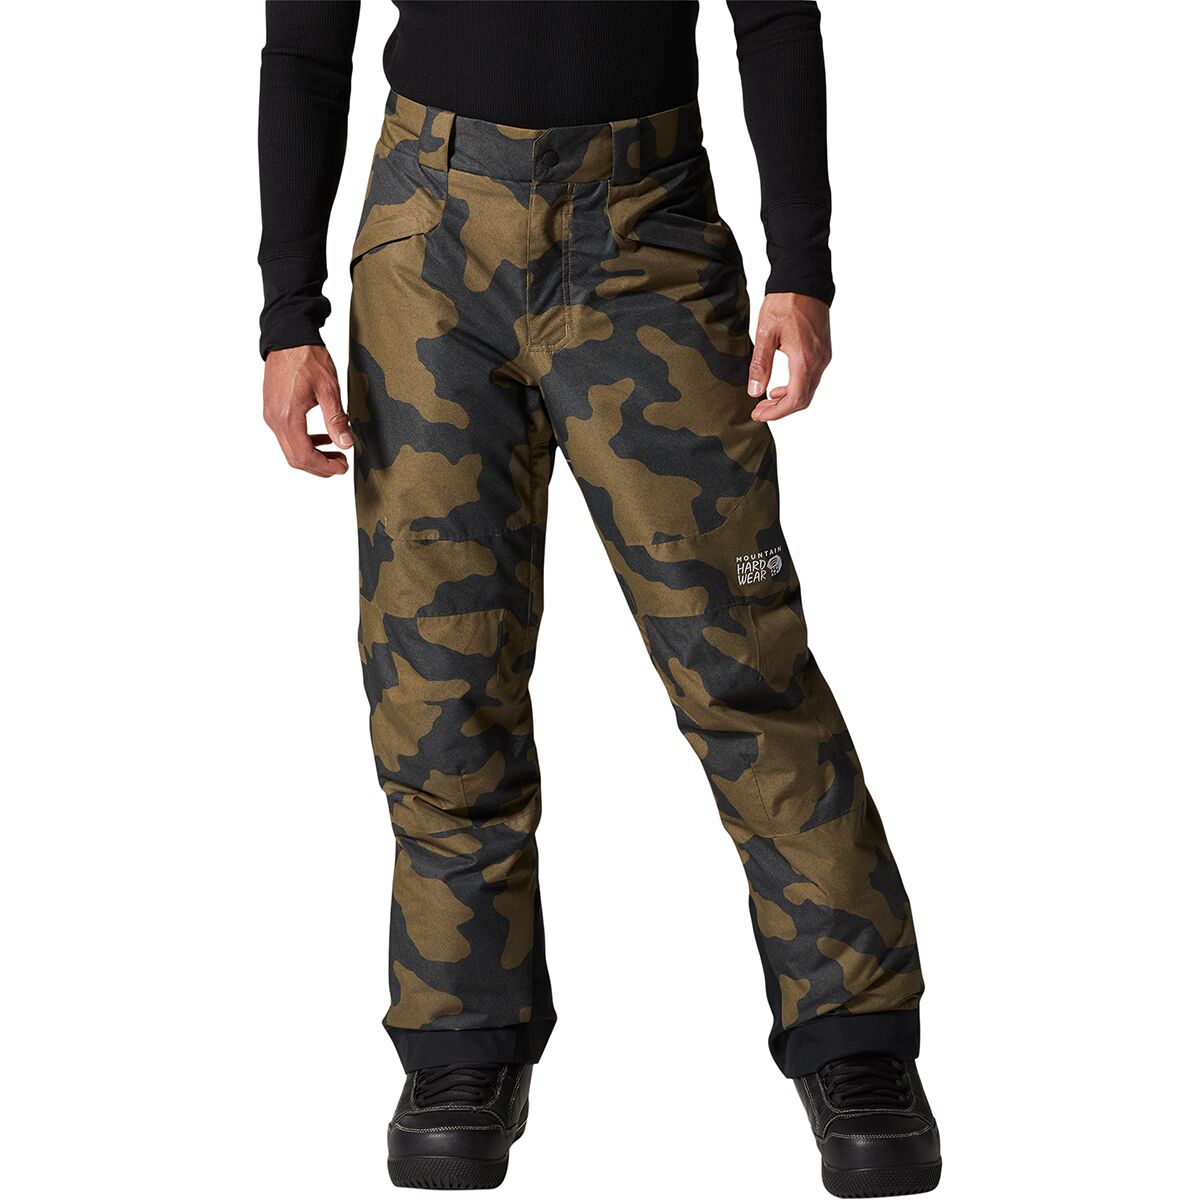 Firefall 2 Insulated Pant - Men